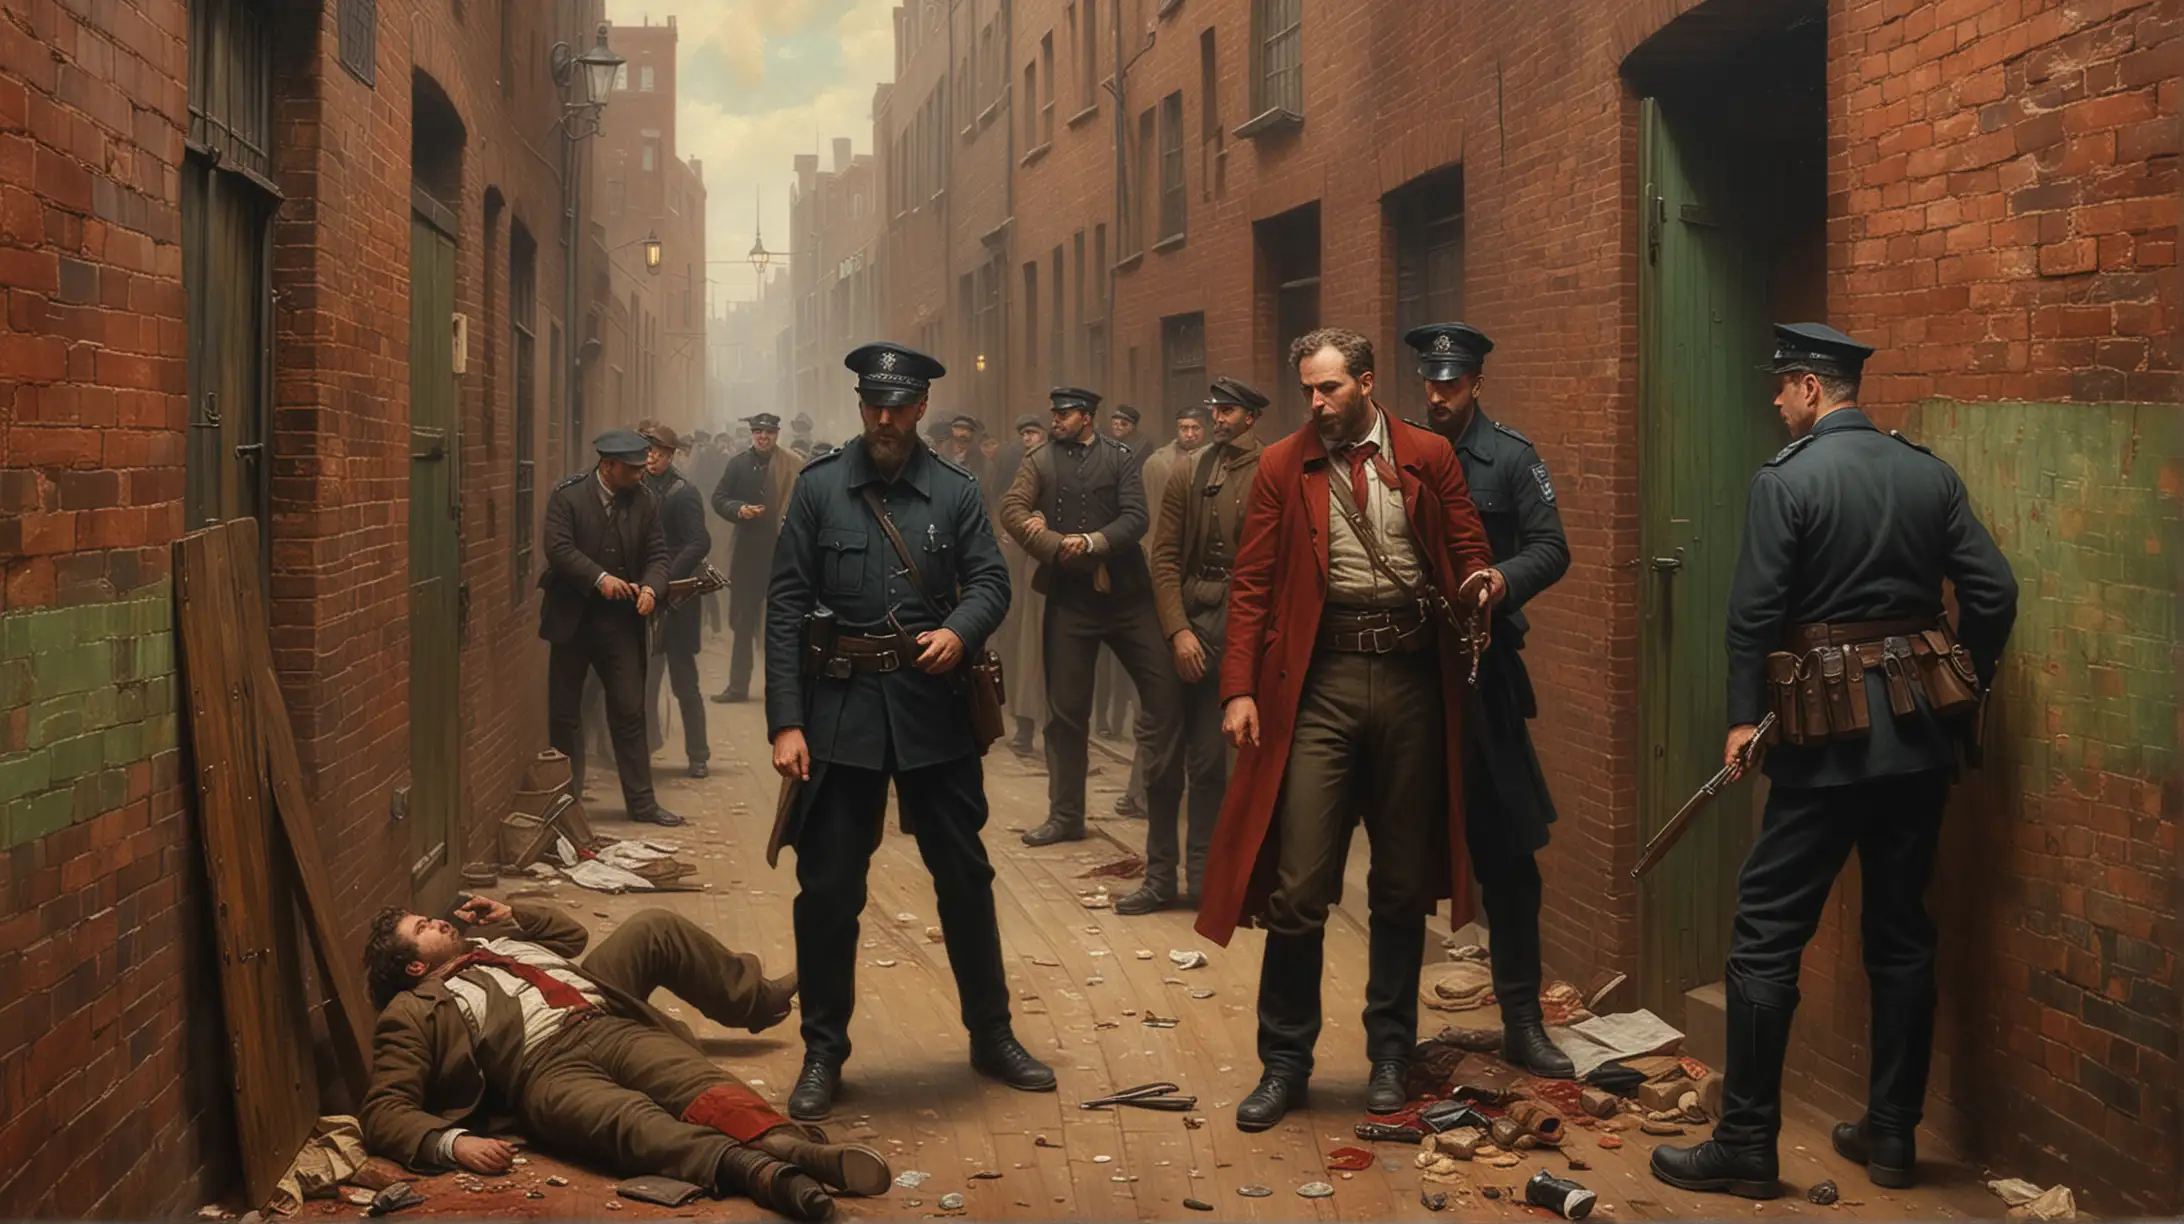 Victorian painting of police finding a murder victim in an alley, Whitechapel 1880s, social realism in the style of George Frederick Watts, red-green pallet and expressionistic, gritty and unsanitized realism